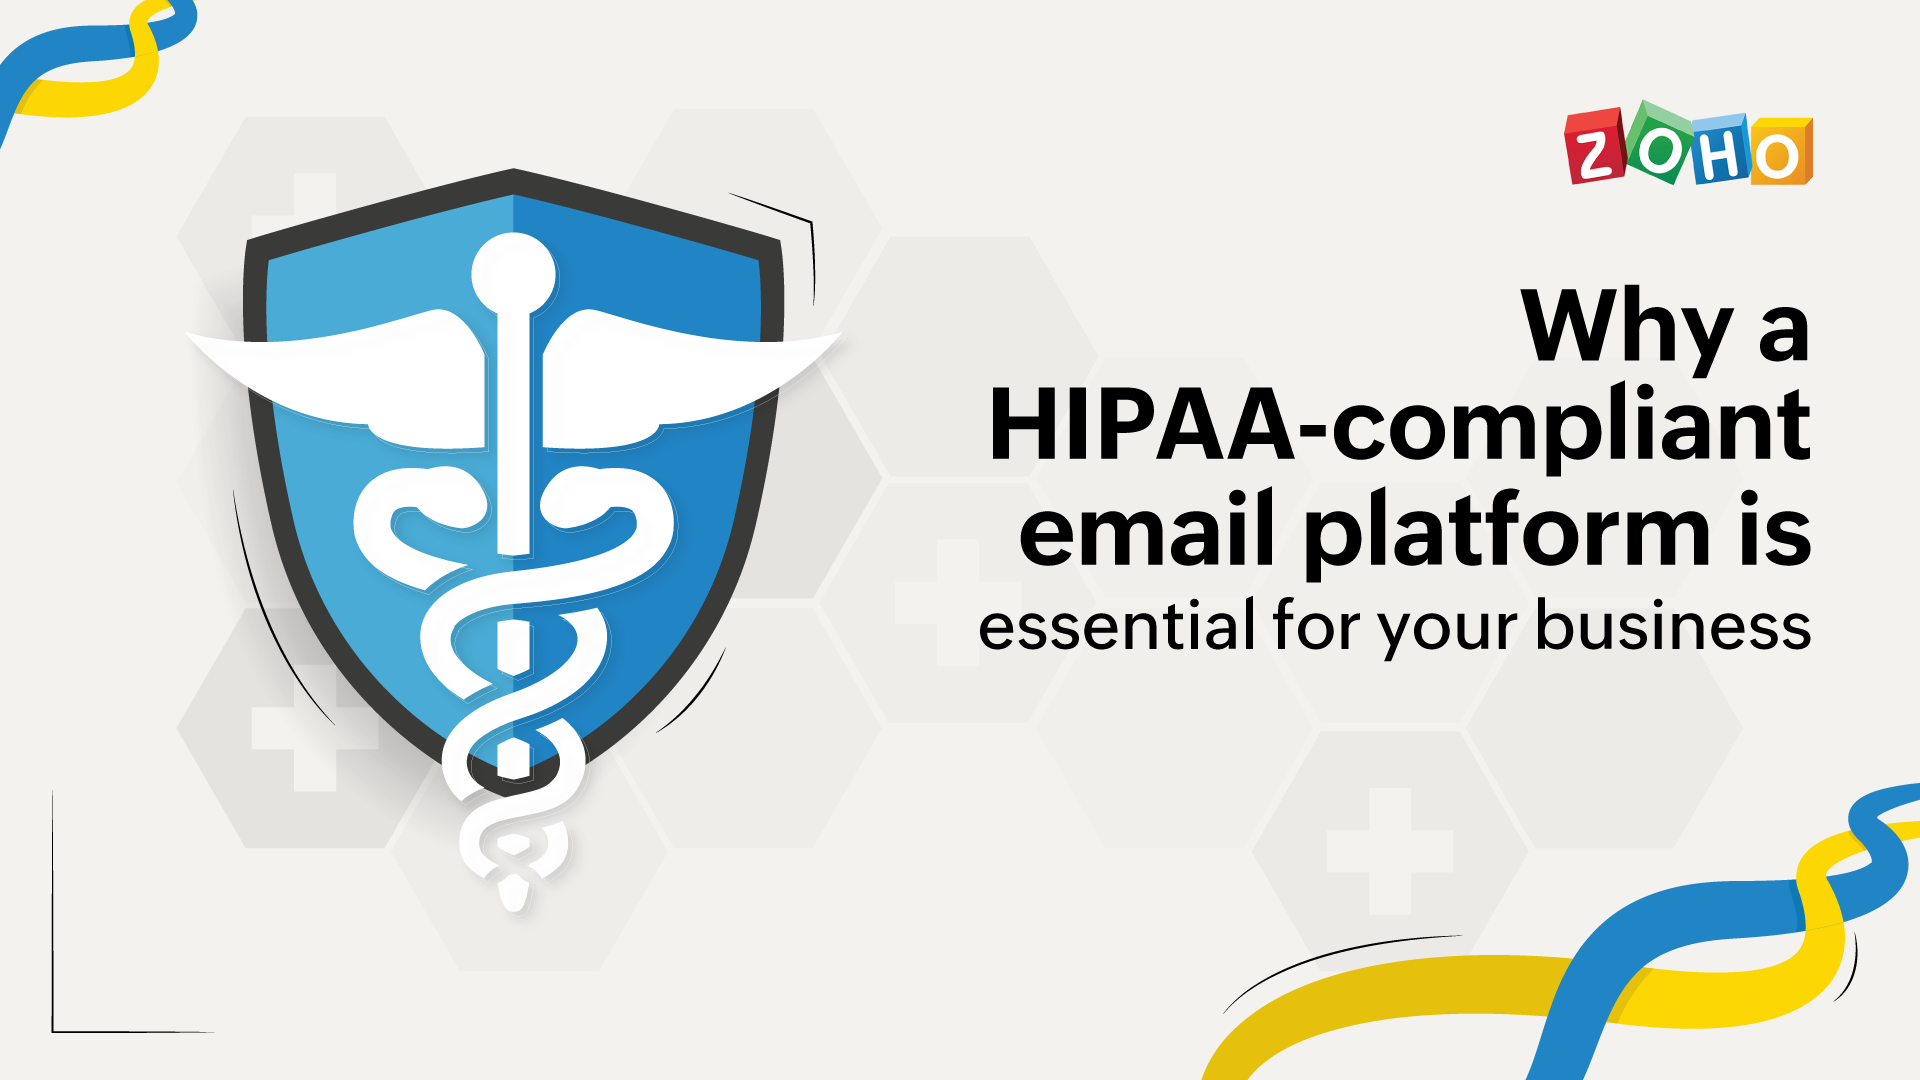 Why a HIPAA-compliant email platform is essential for your business